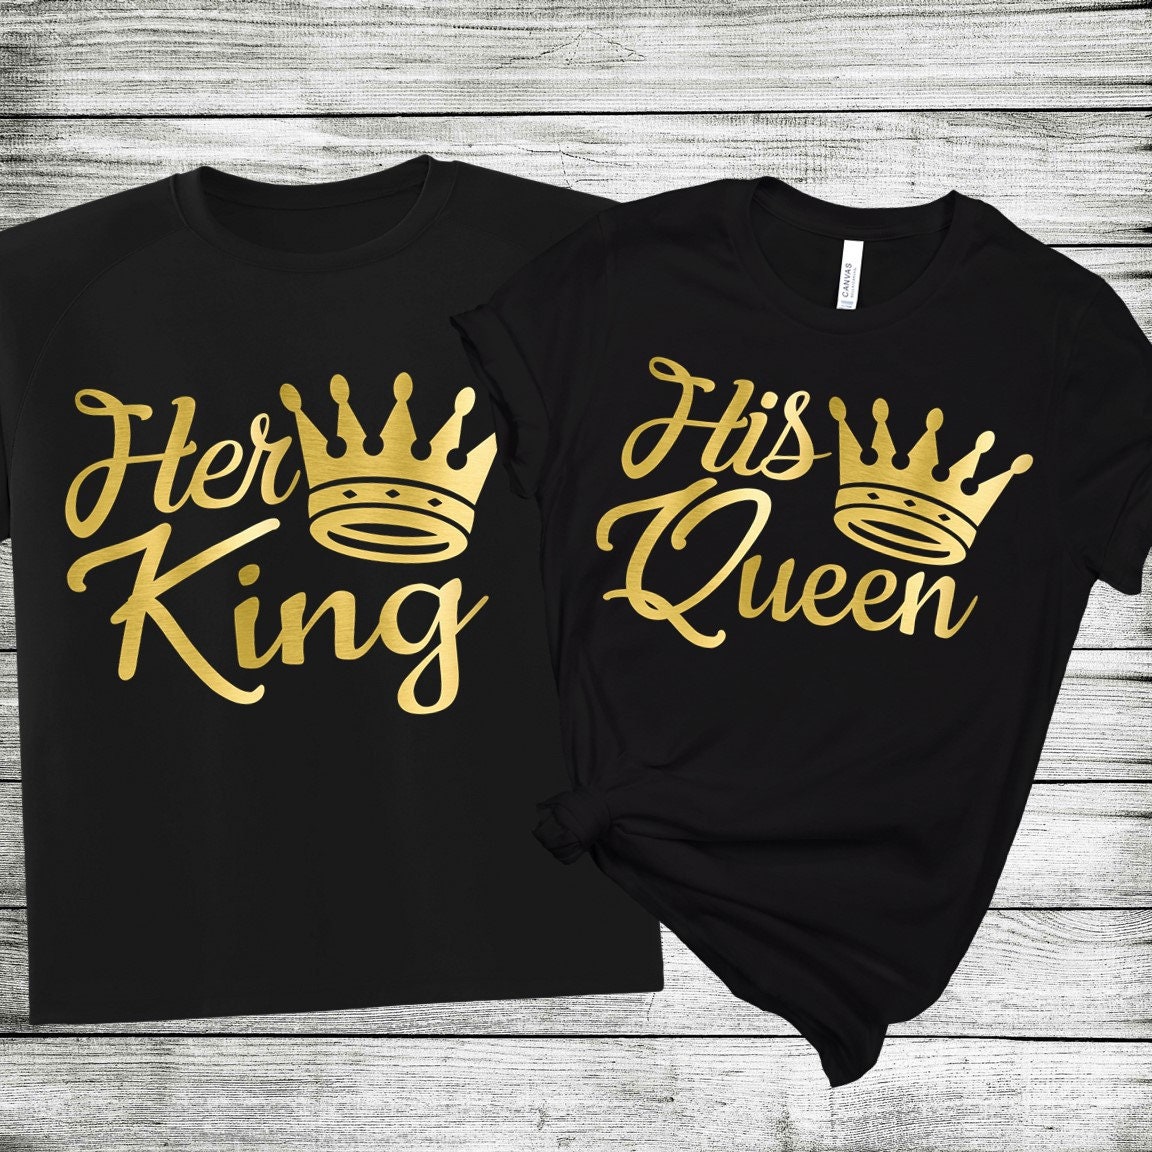 Her King and His Queen Shirt Matching Love Couples Shirts - Etsy